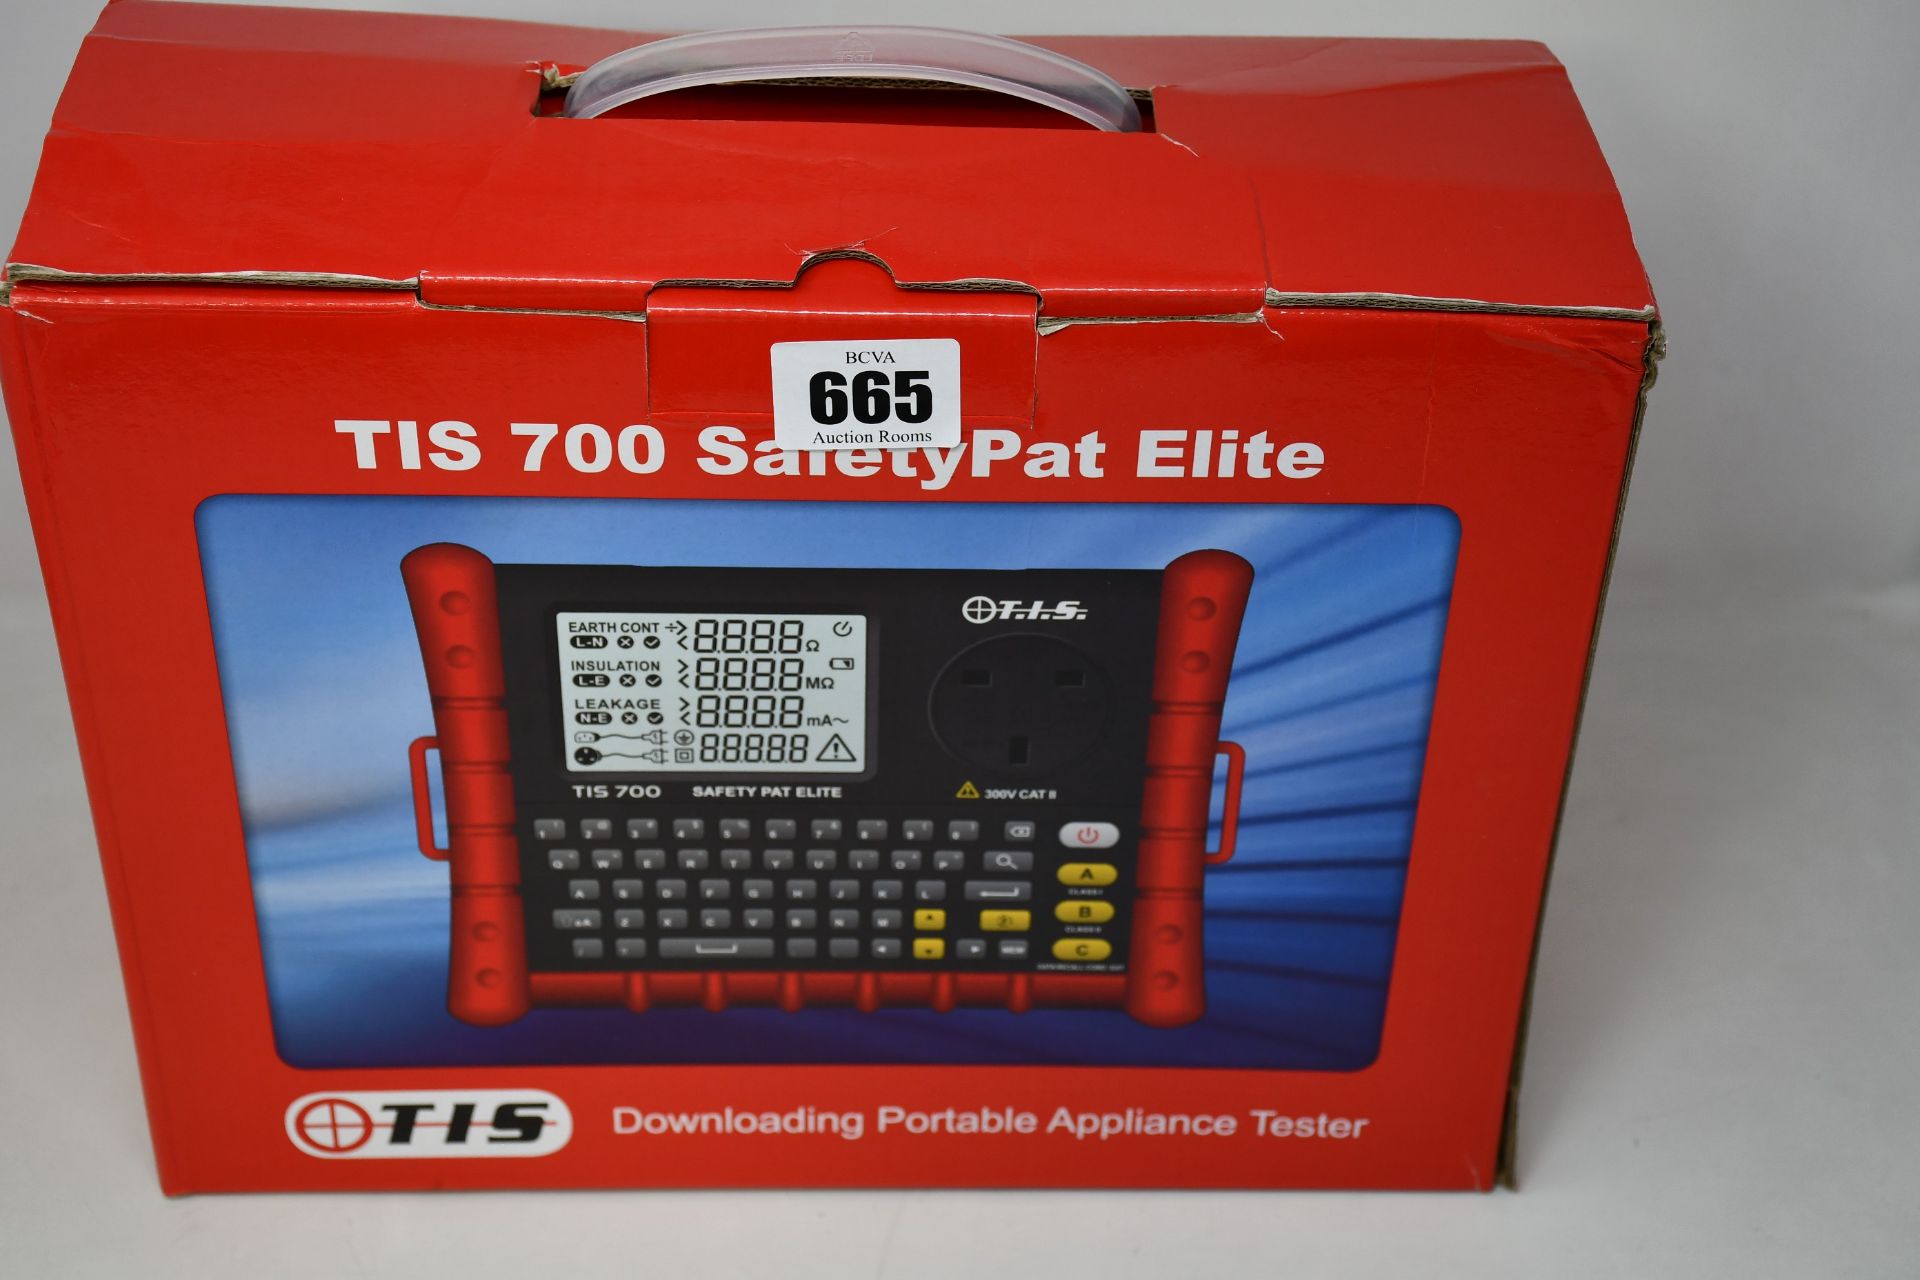 A boxed as new TIS 700 SafetyPat Elite.